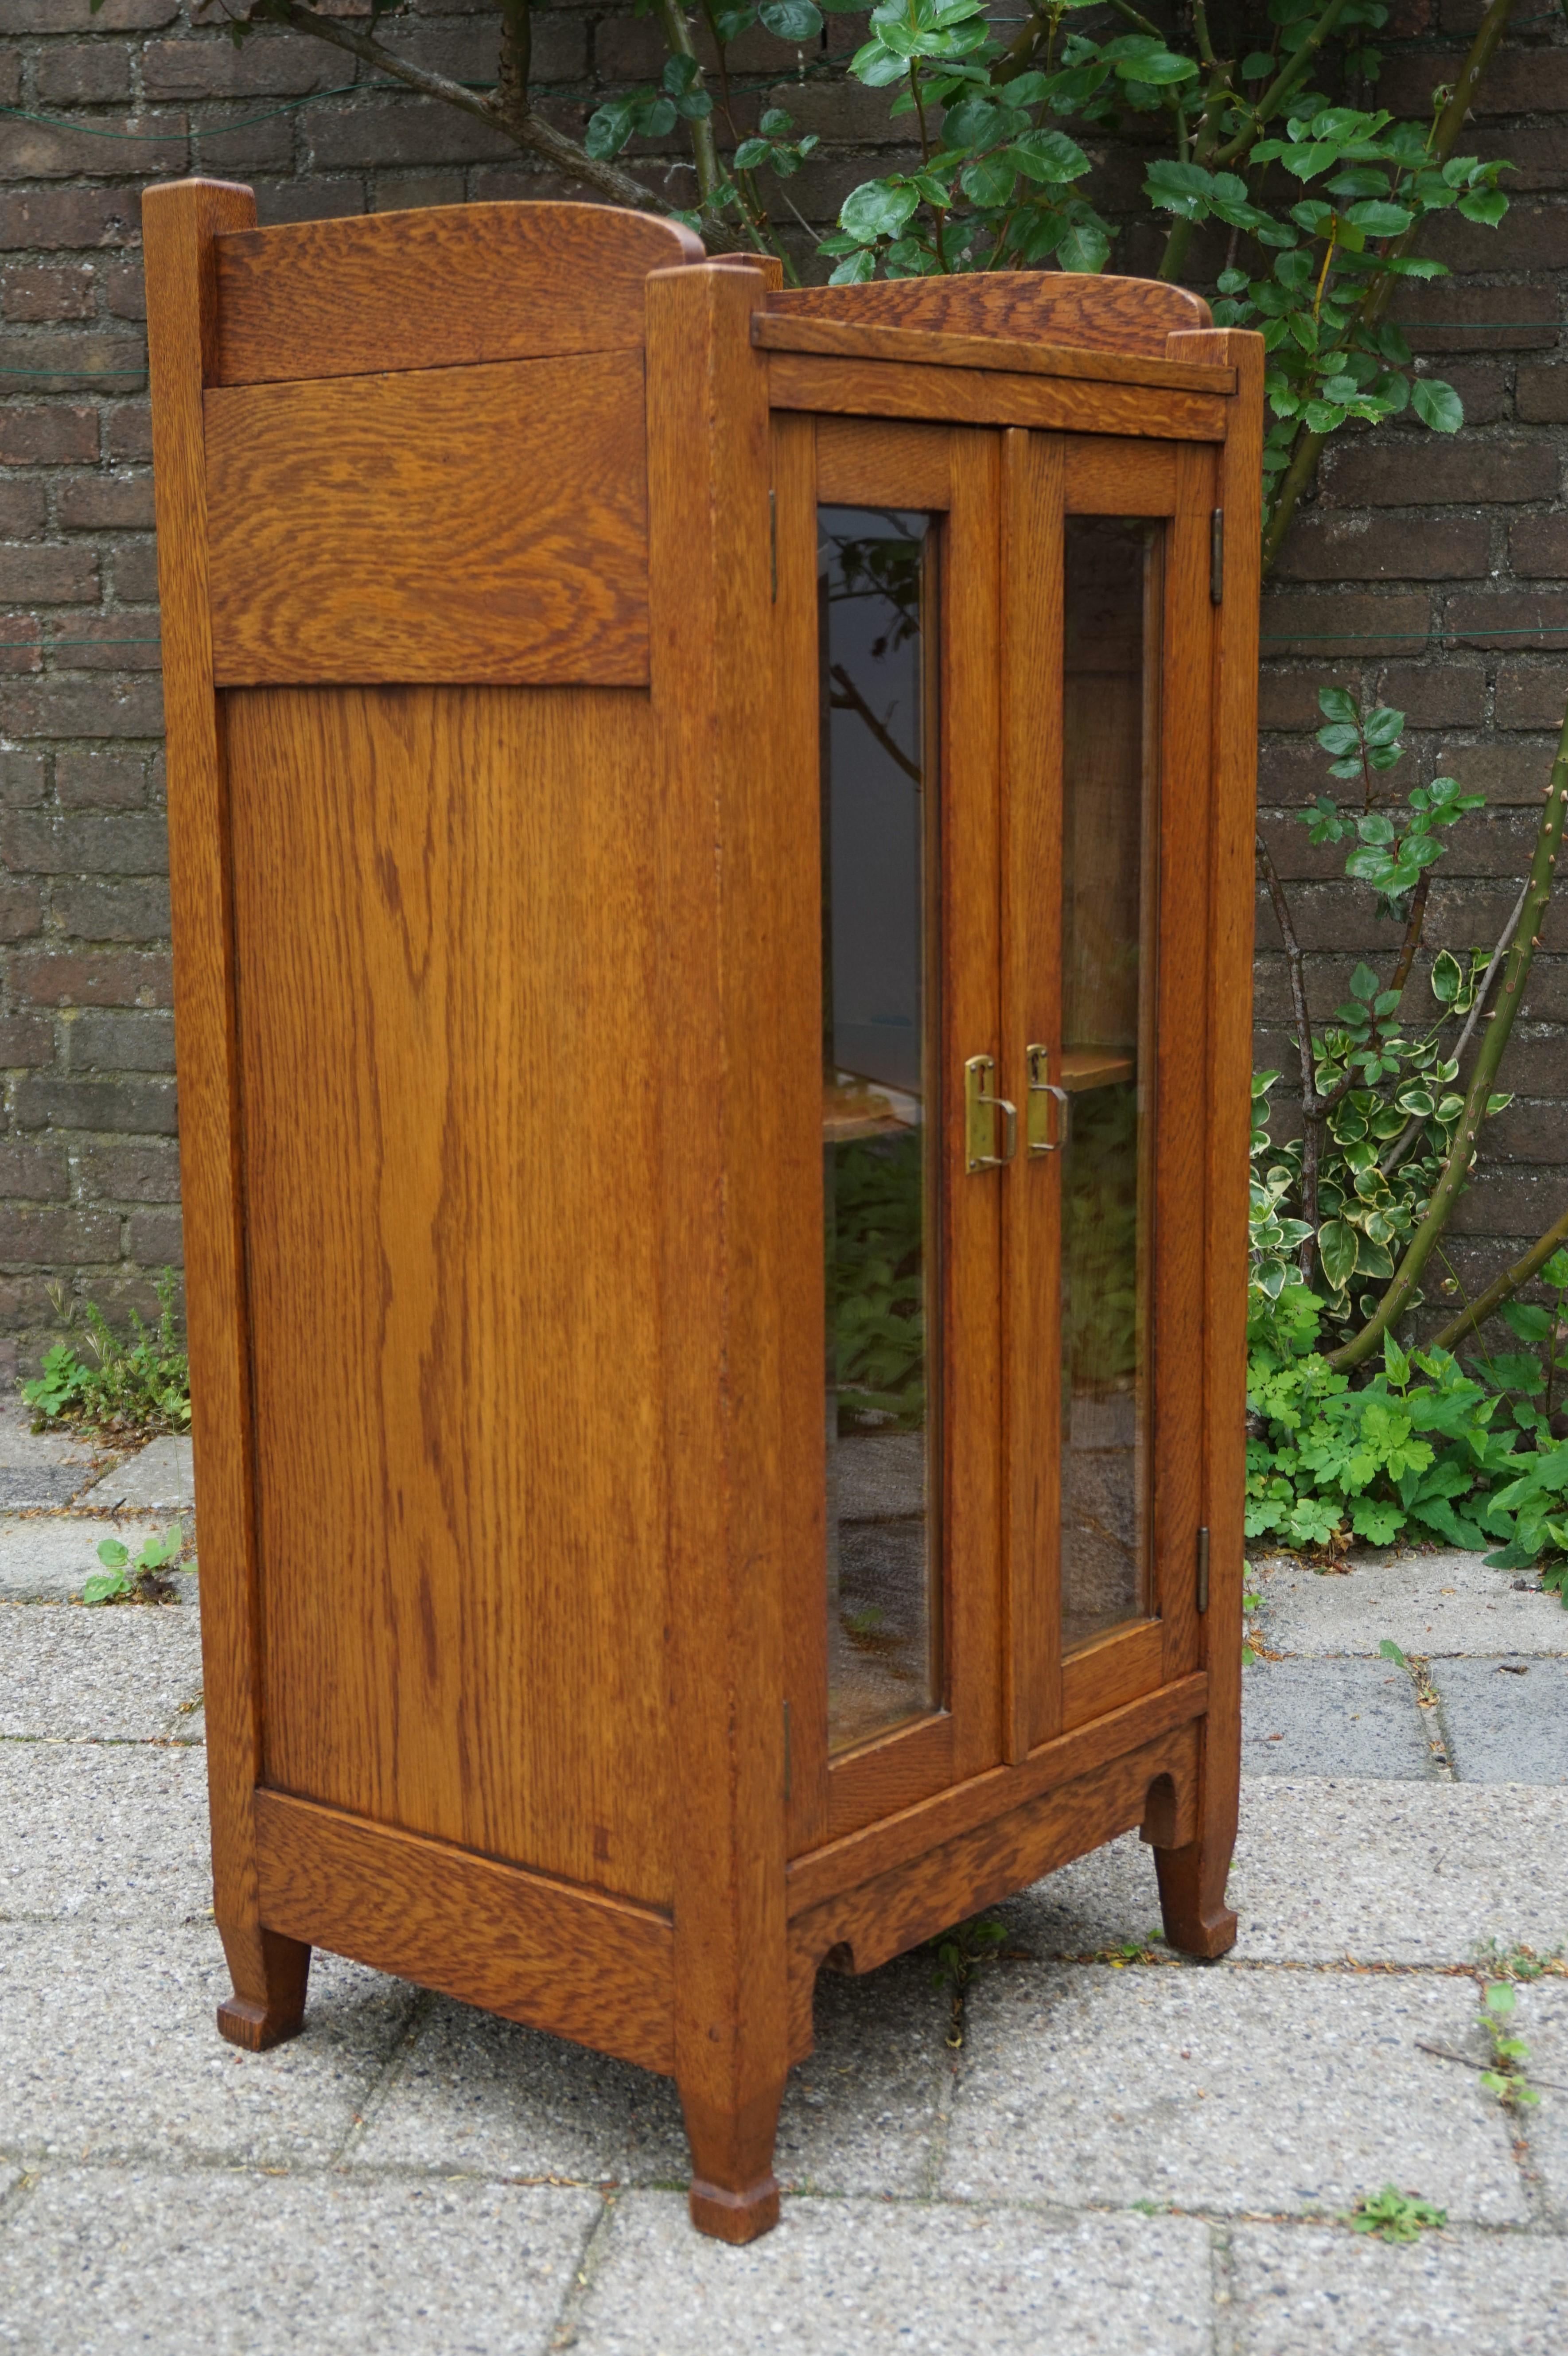 Beautiful and highly practical antique cabinet.

This finest quality and excellent condition cabinet dates back to 1900-1910 and we are certain this is the only one of its kind. This unique antique is entirely made of solid oak and the geometrical